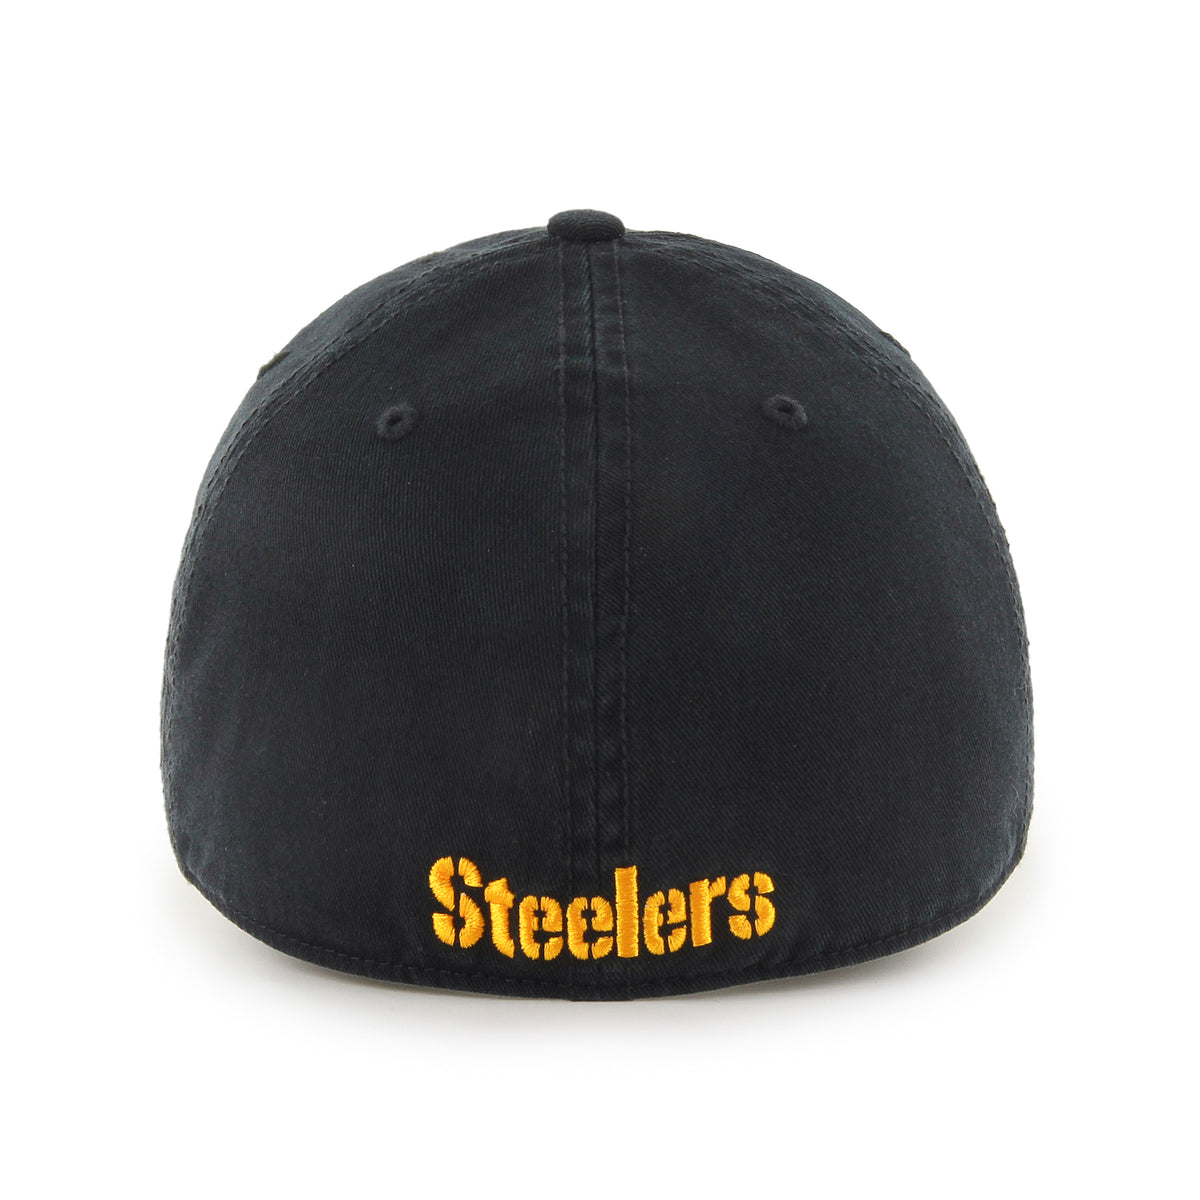 PITTSBURGH STEELERS CLASSIC '47 FRANCHISE